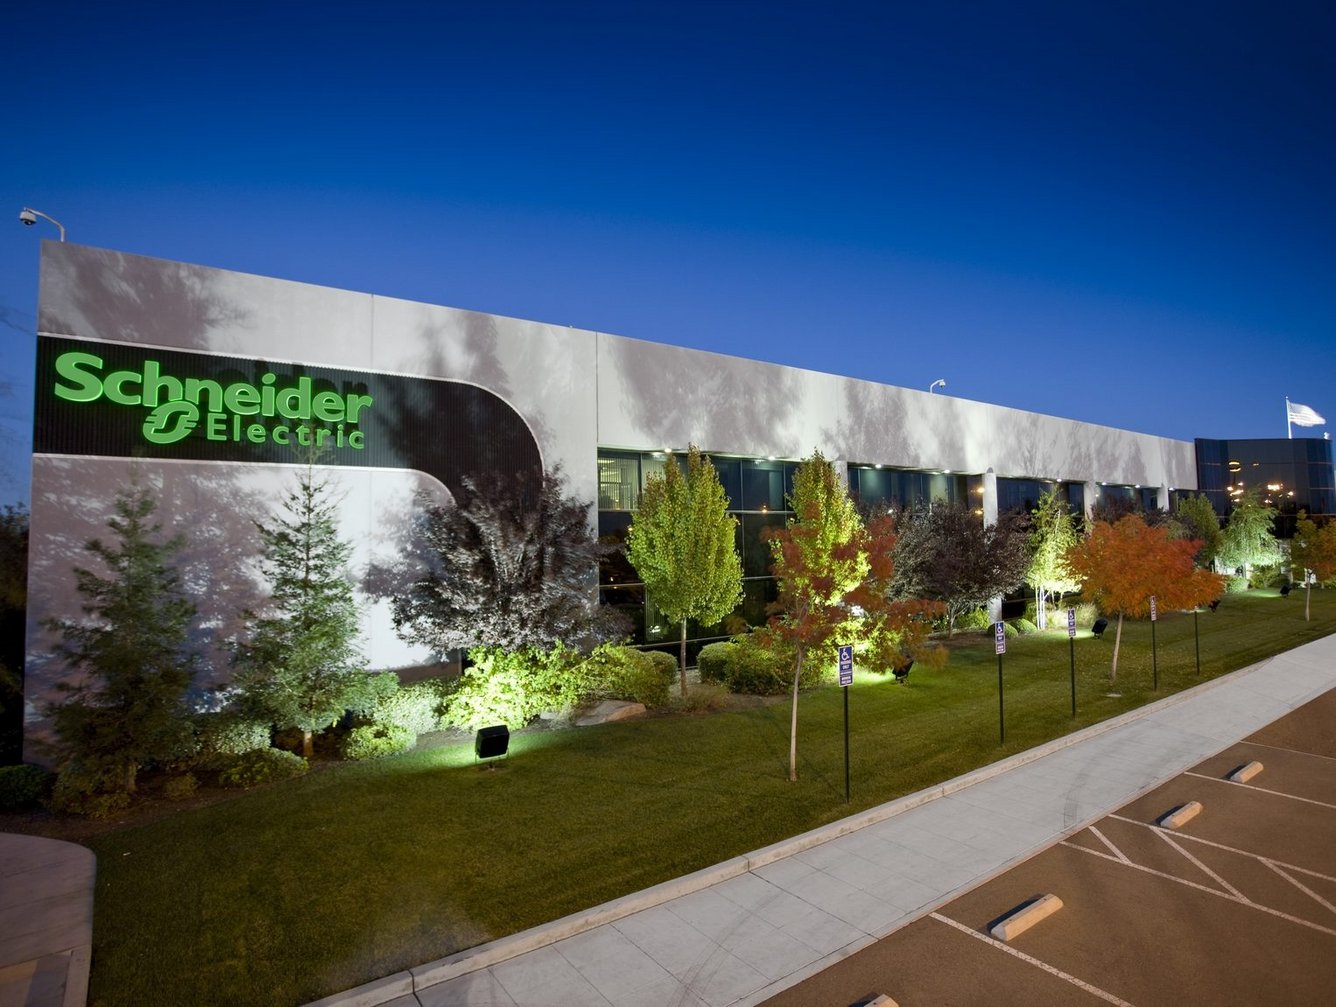 Schneider Electric Launches Partnerships of the Future – Energy Focus Report